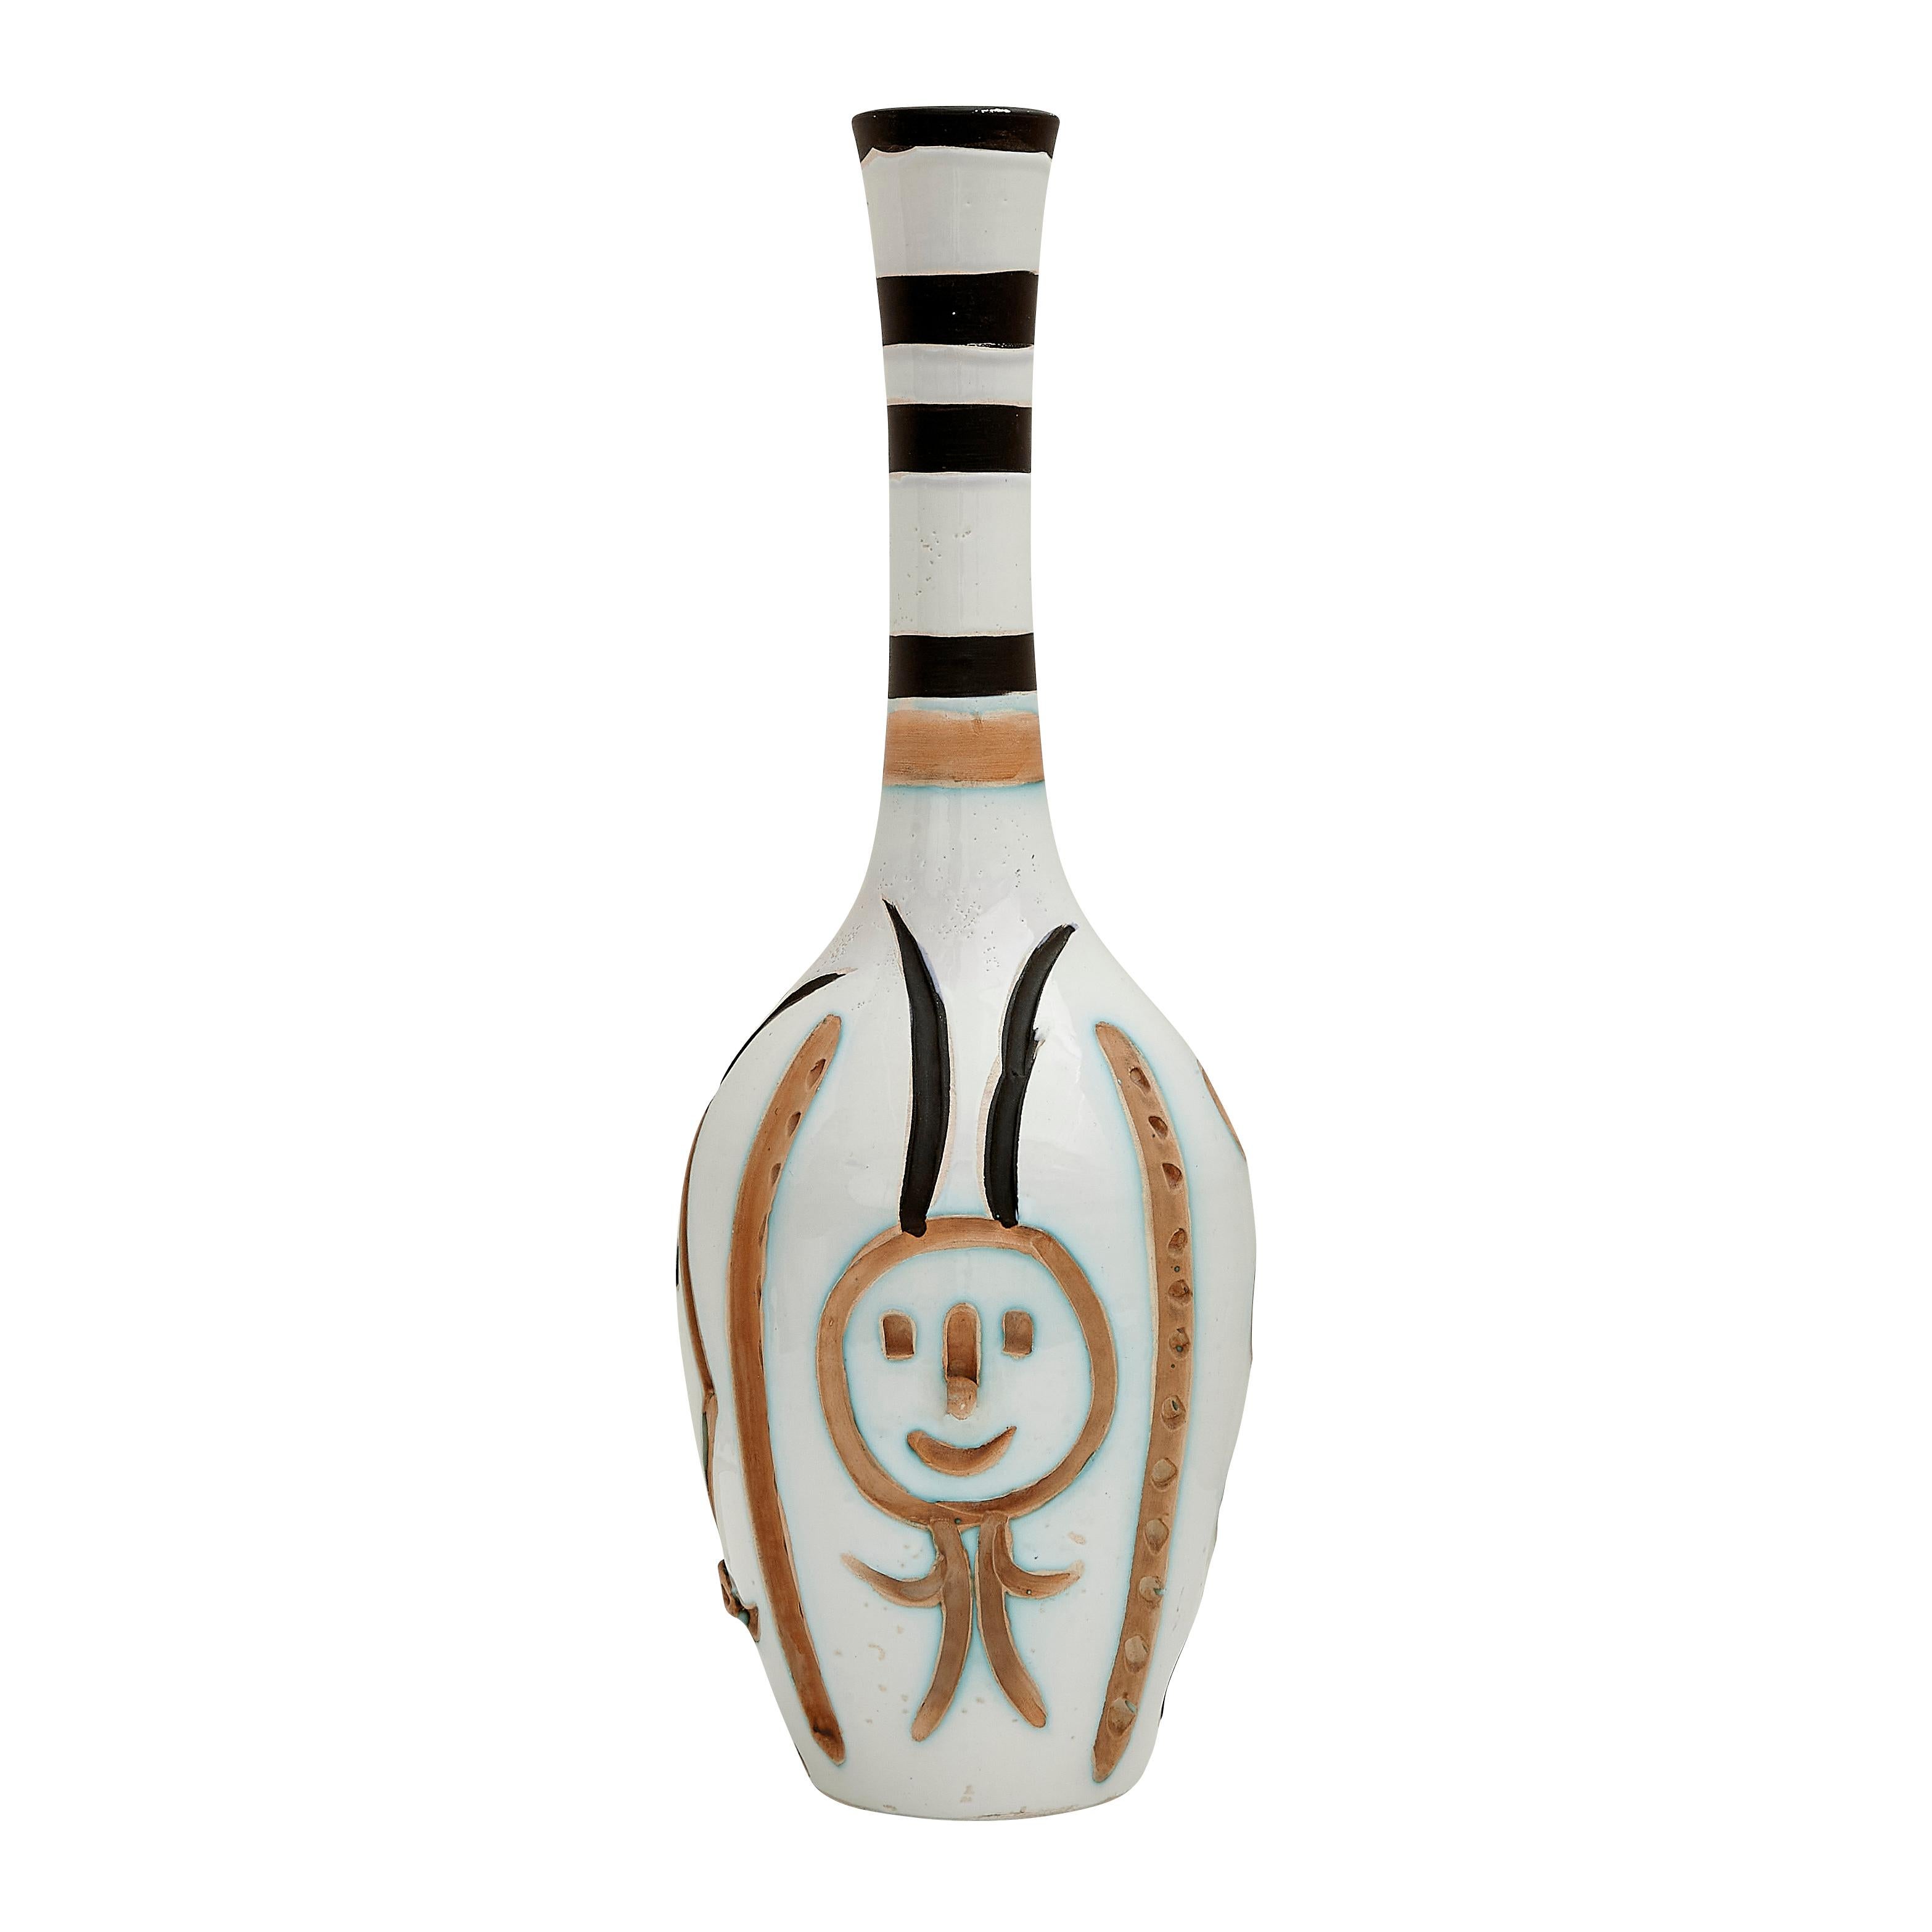 PABLO PICASSO (1881-1973)
Bouteille gravée (A. R. 249)

Terre de faïence vase, painted and partially glazed, 1954, 172/300 and inscribed 'Edition Picasso', with the d'après Picasso and Madoura stamps.
